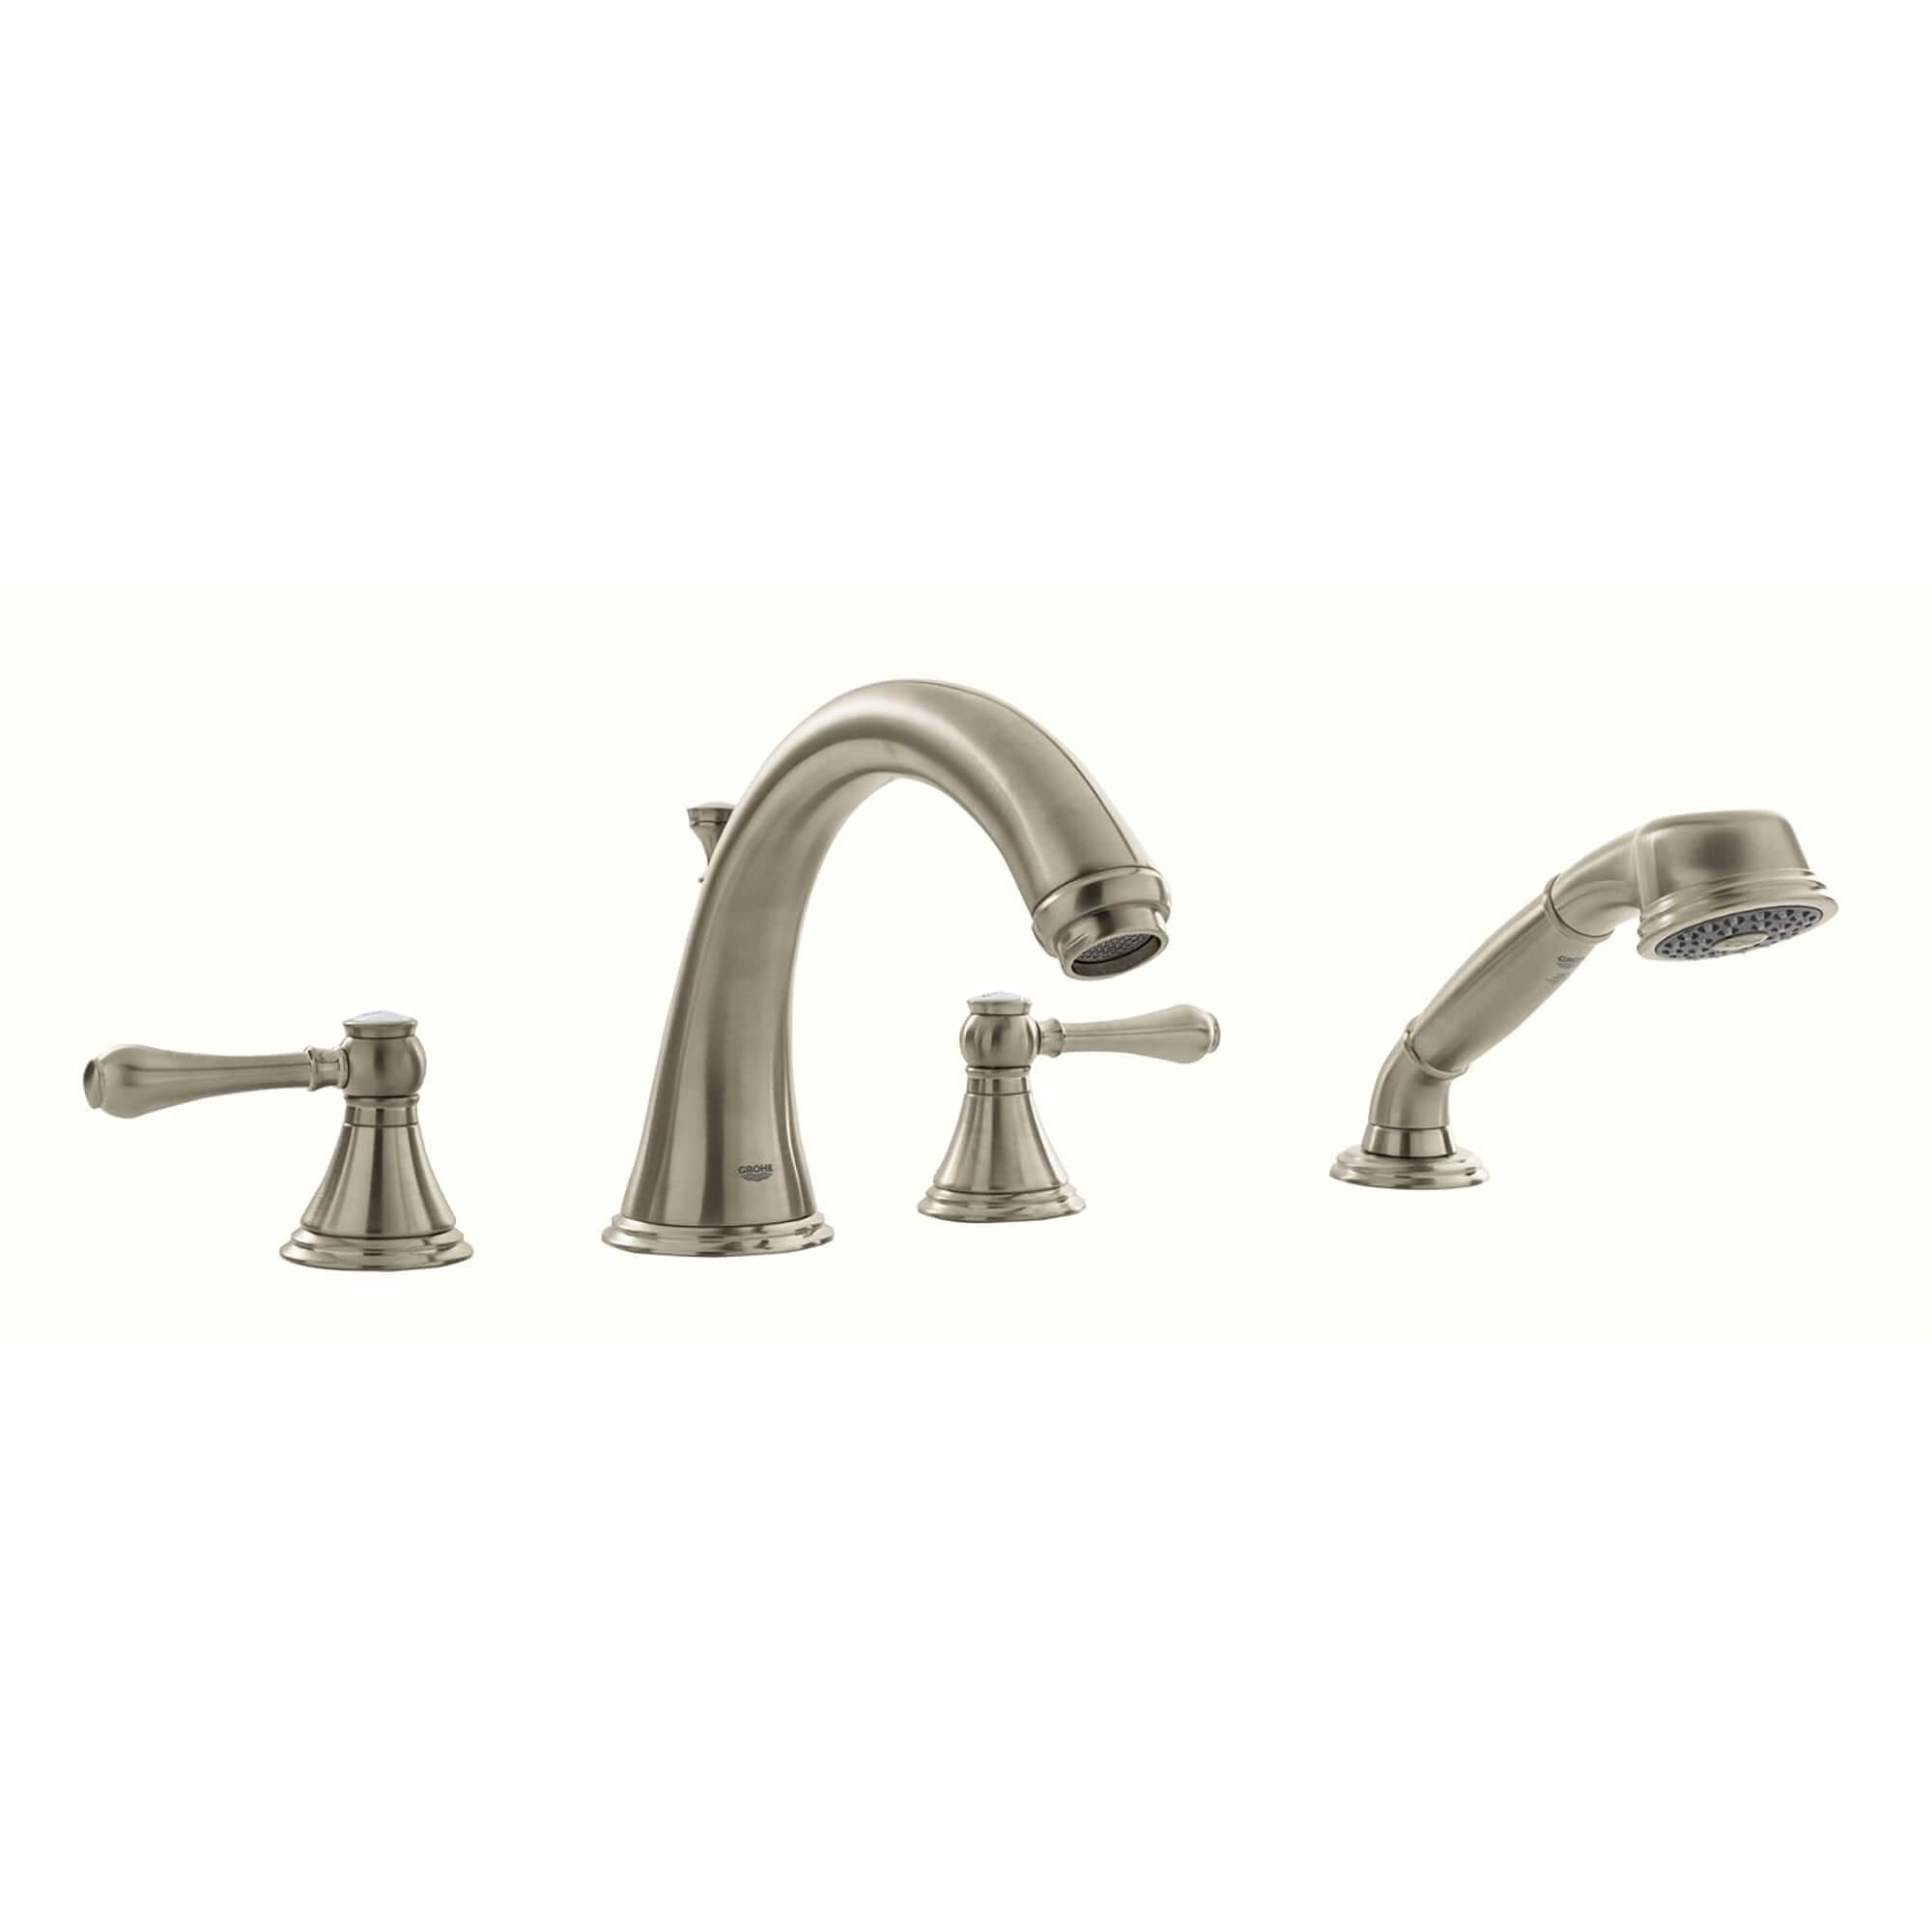 Geneva Manettes leviers la paire GROHE BRUSHED NICKEL